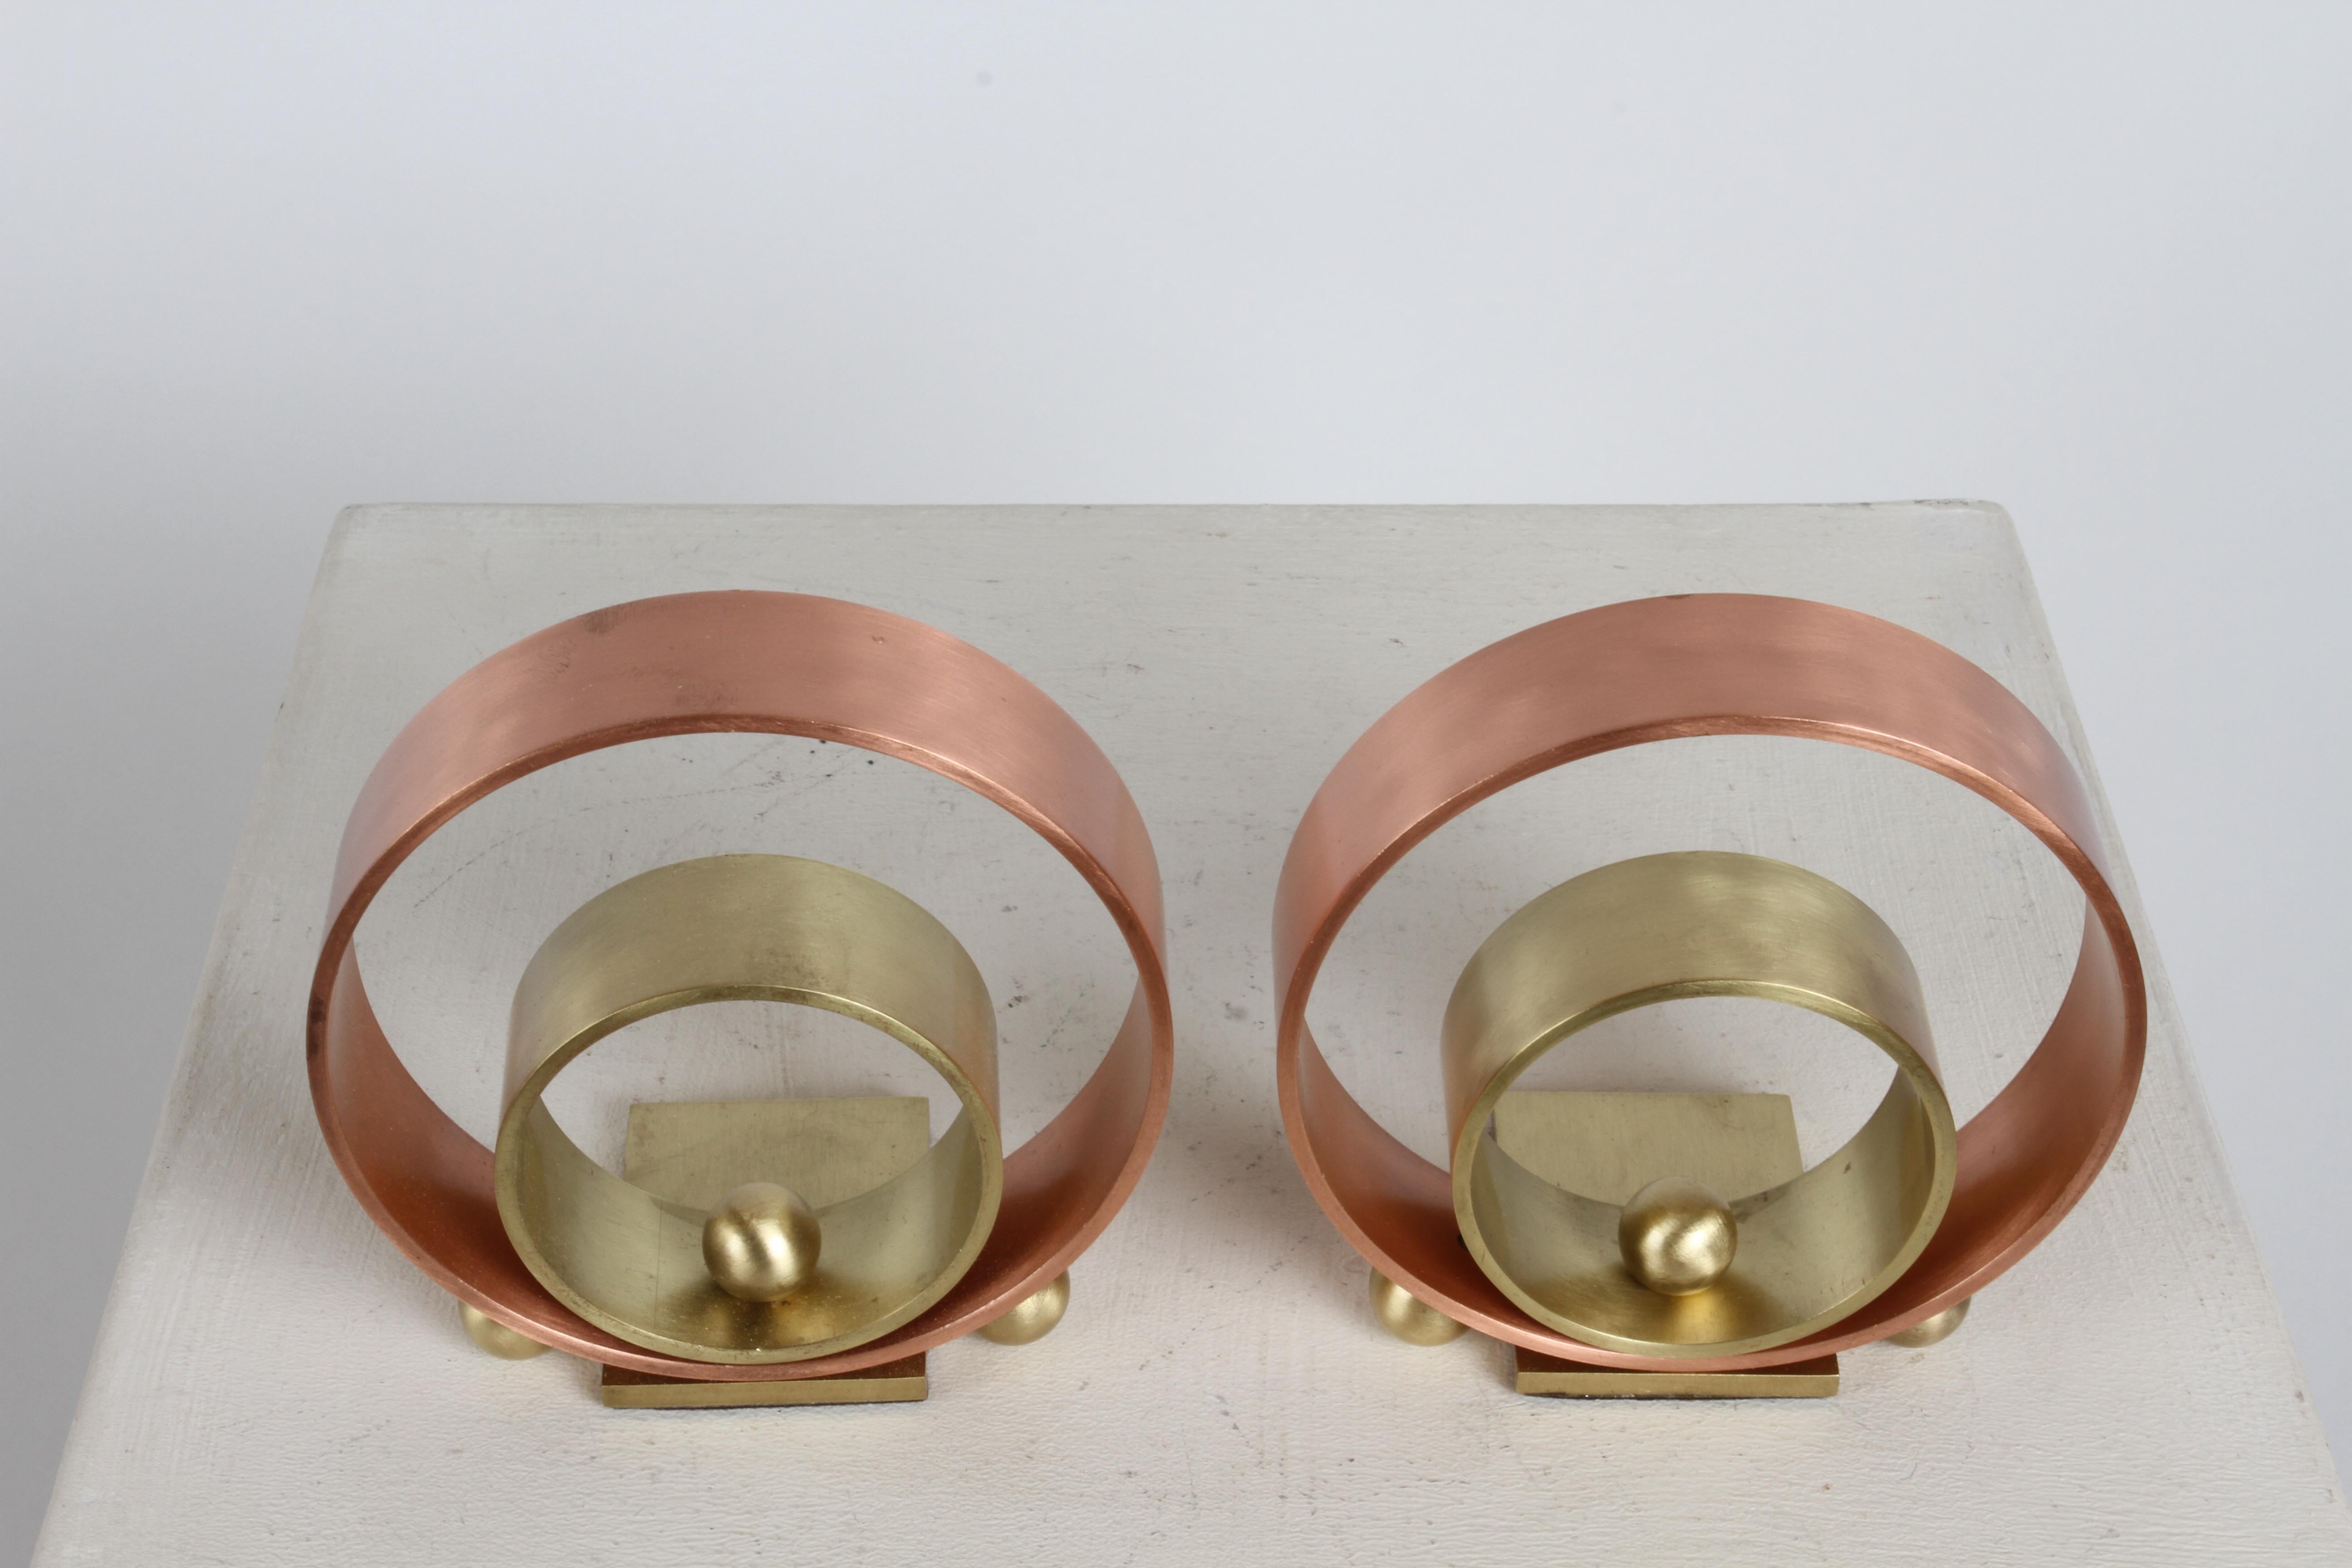 Polished Pair of Machine Age Art Deco Copper & Brass Bookends by Walter Von Nessen For Sale